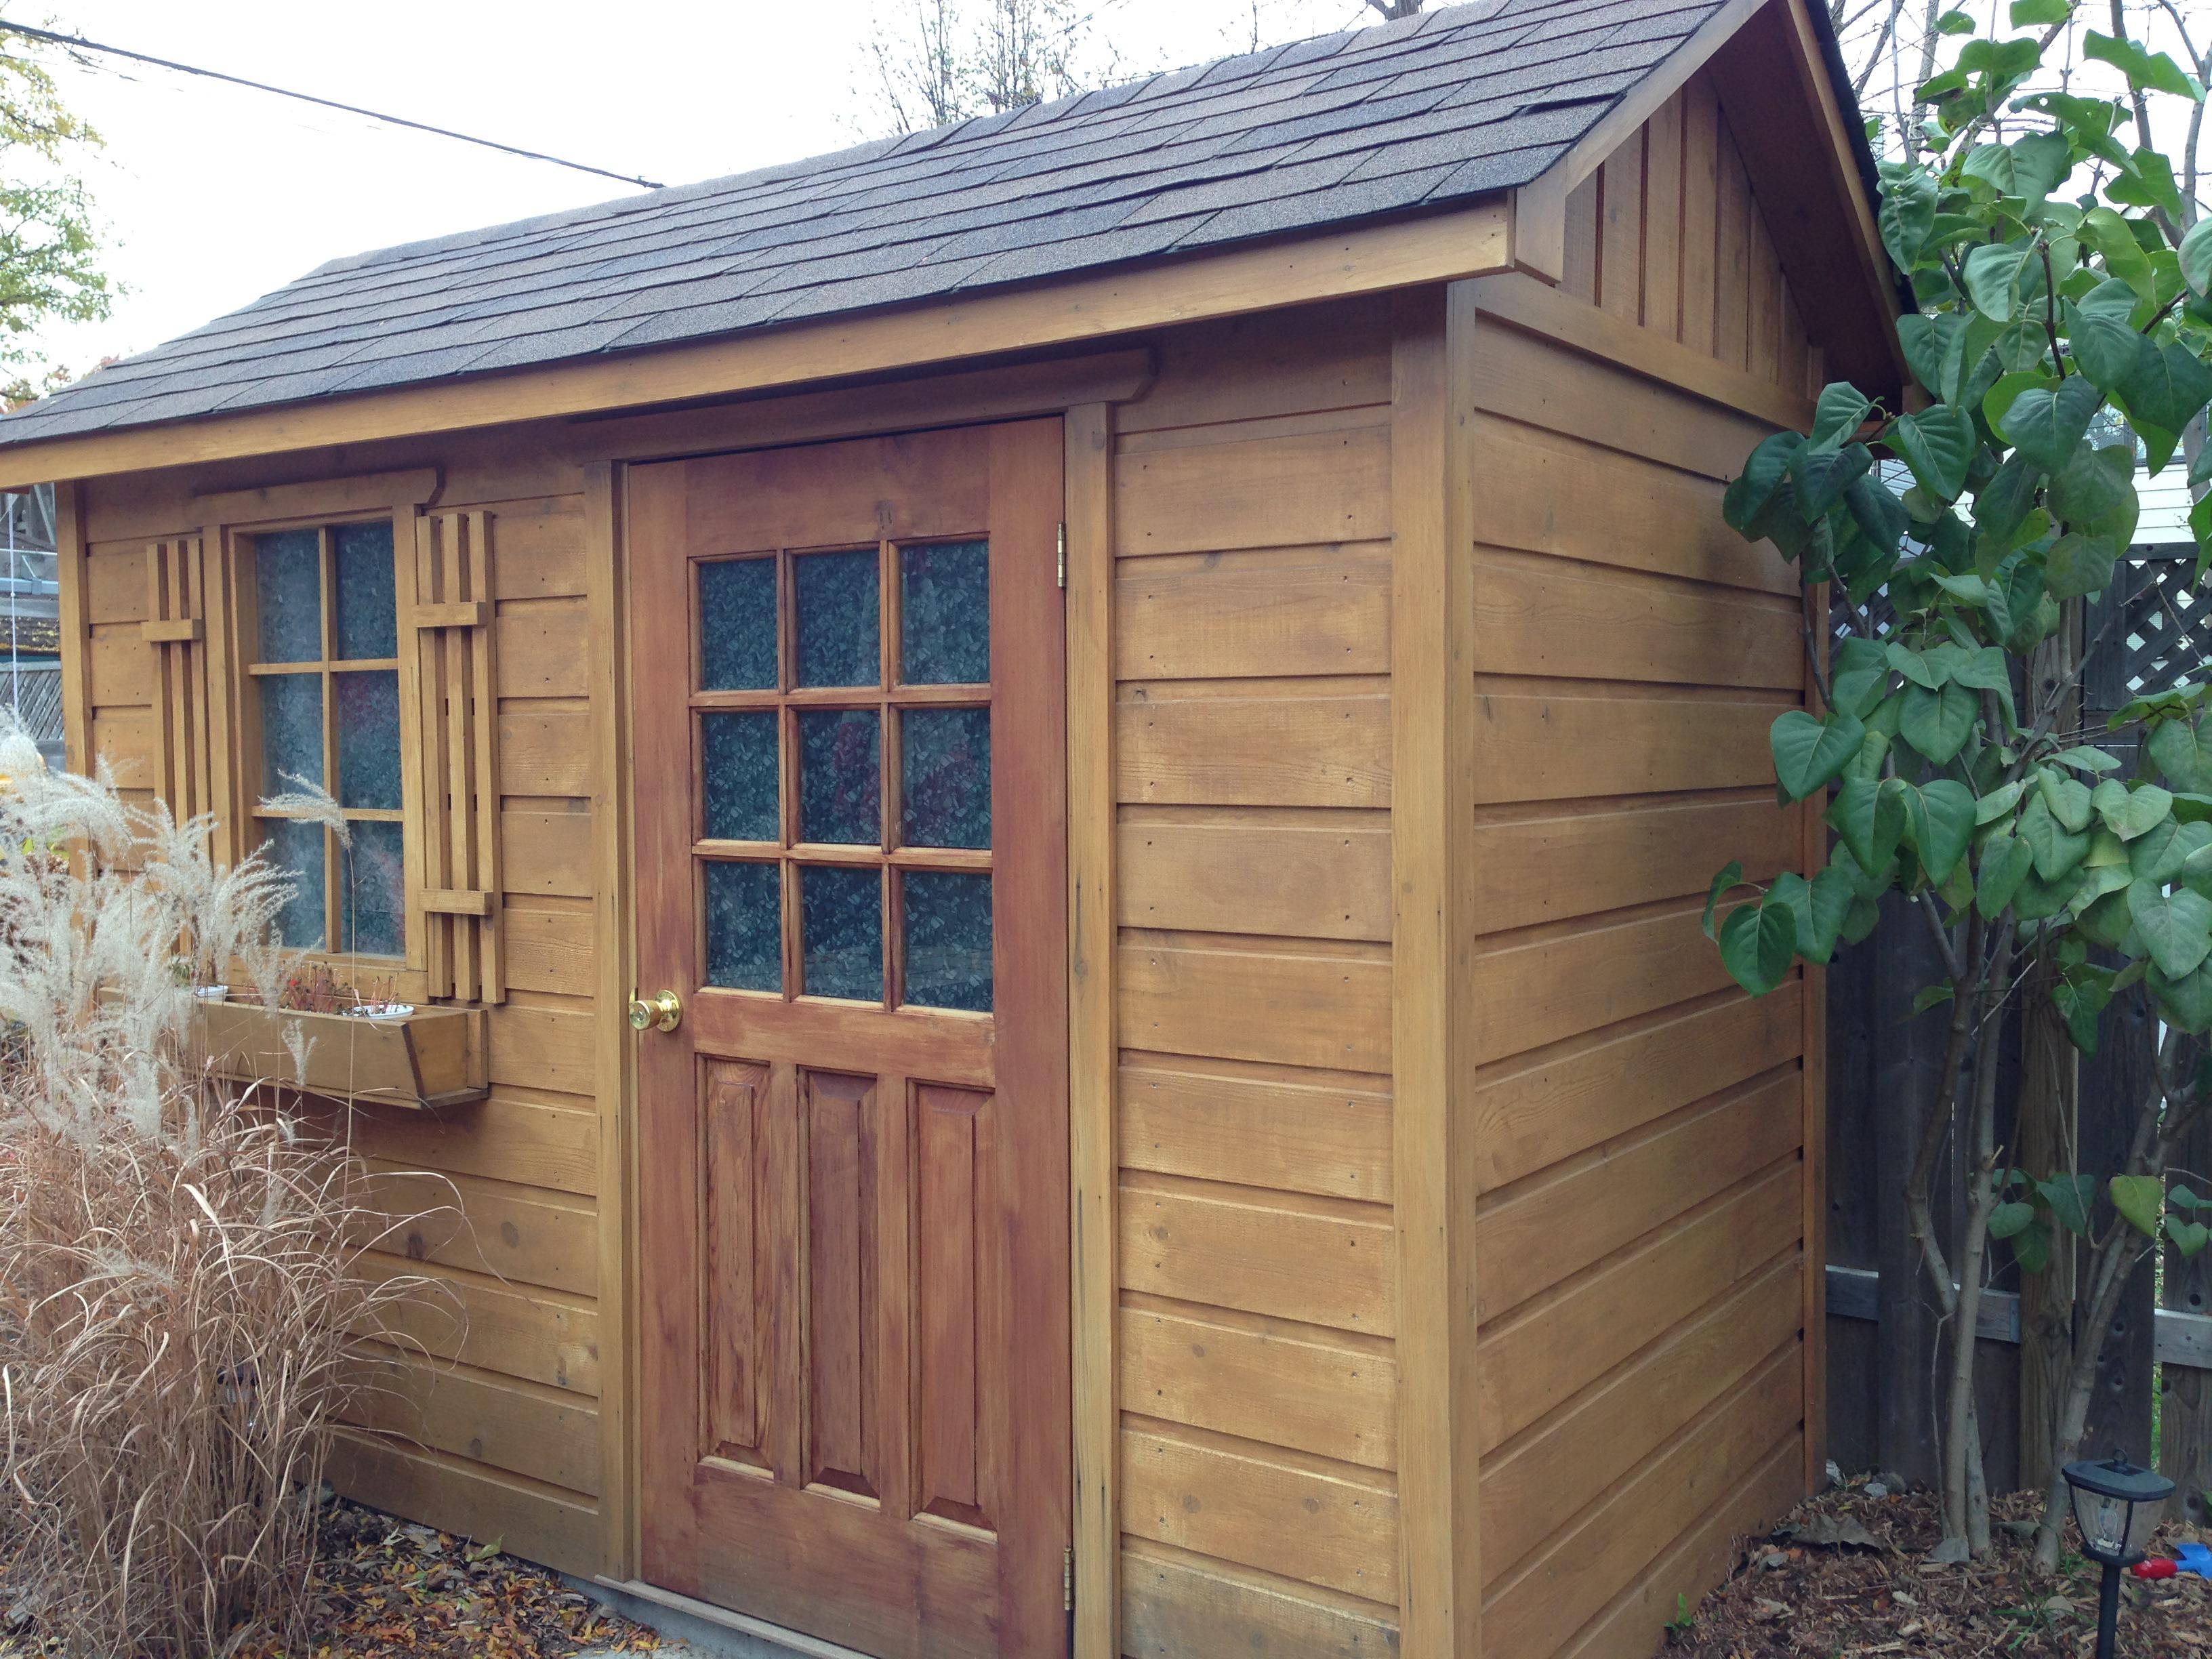 palmerston shed kit 5x10 with deluxe 9-lite single door in Toronto Ontario. ID number 184352-1.